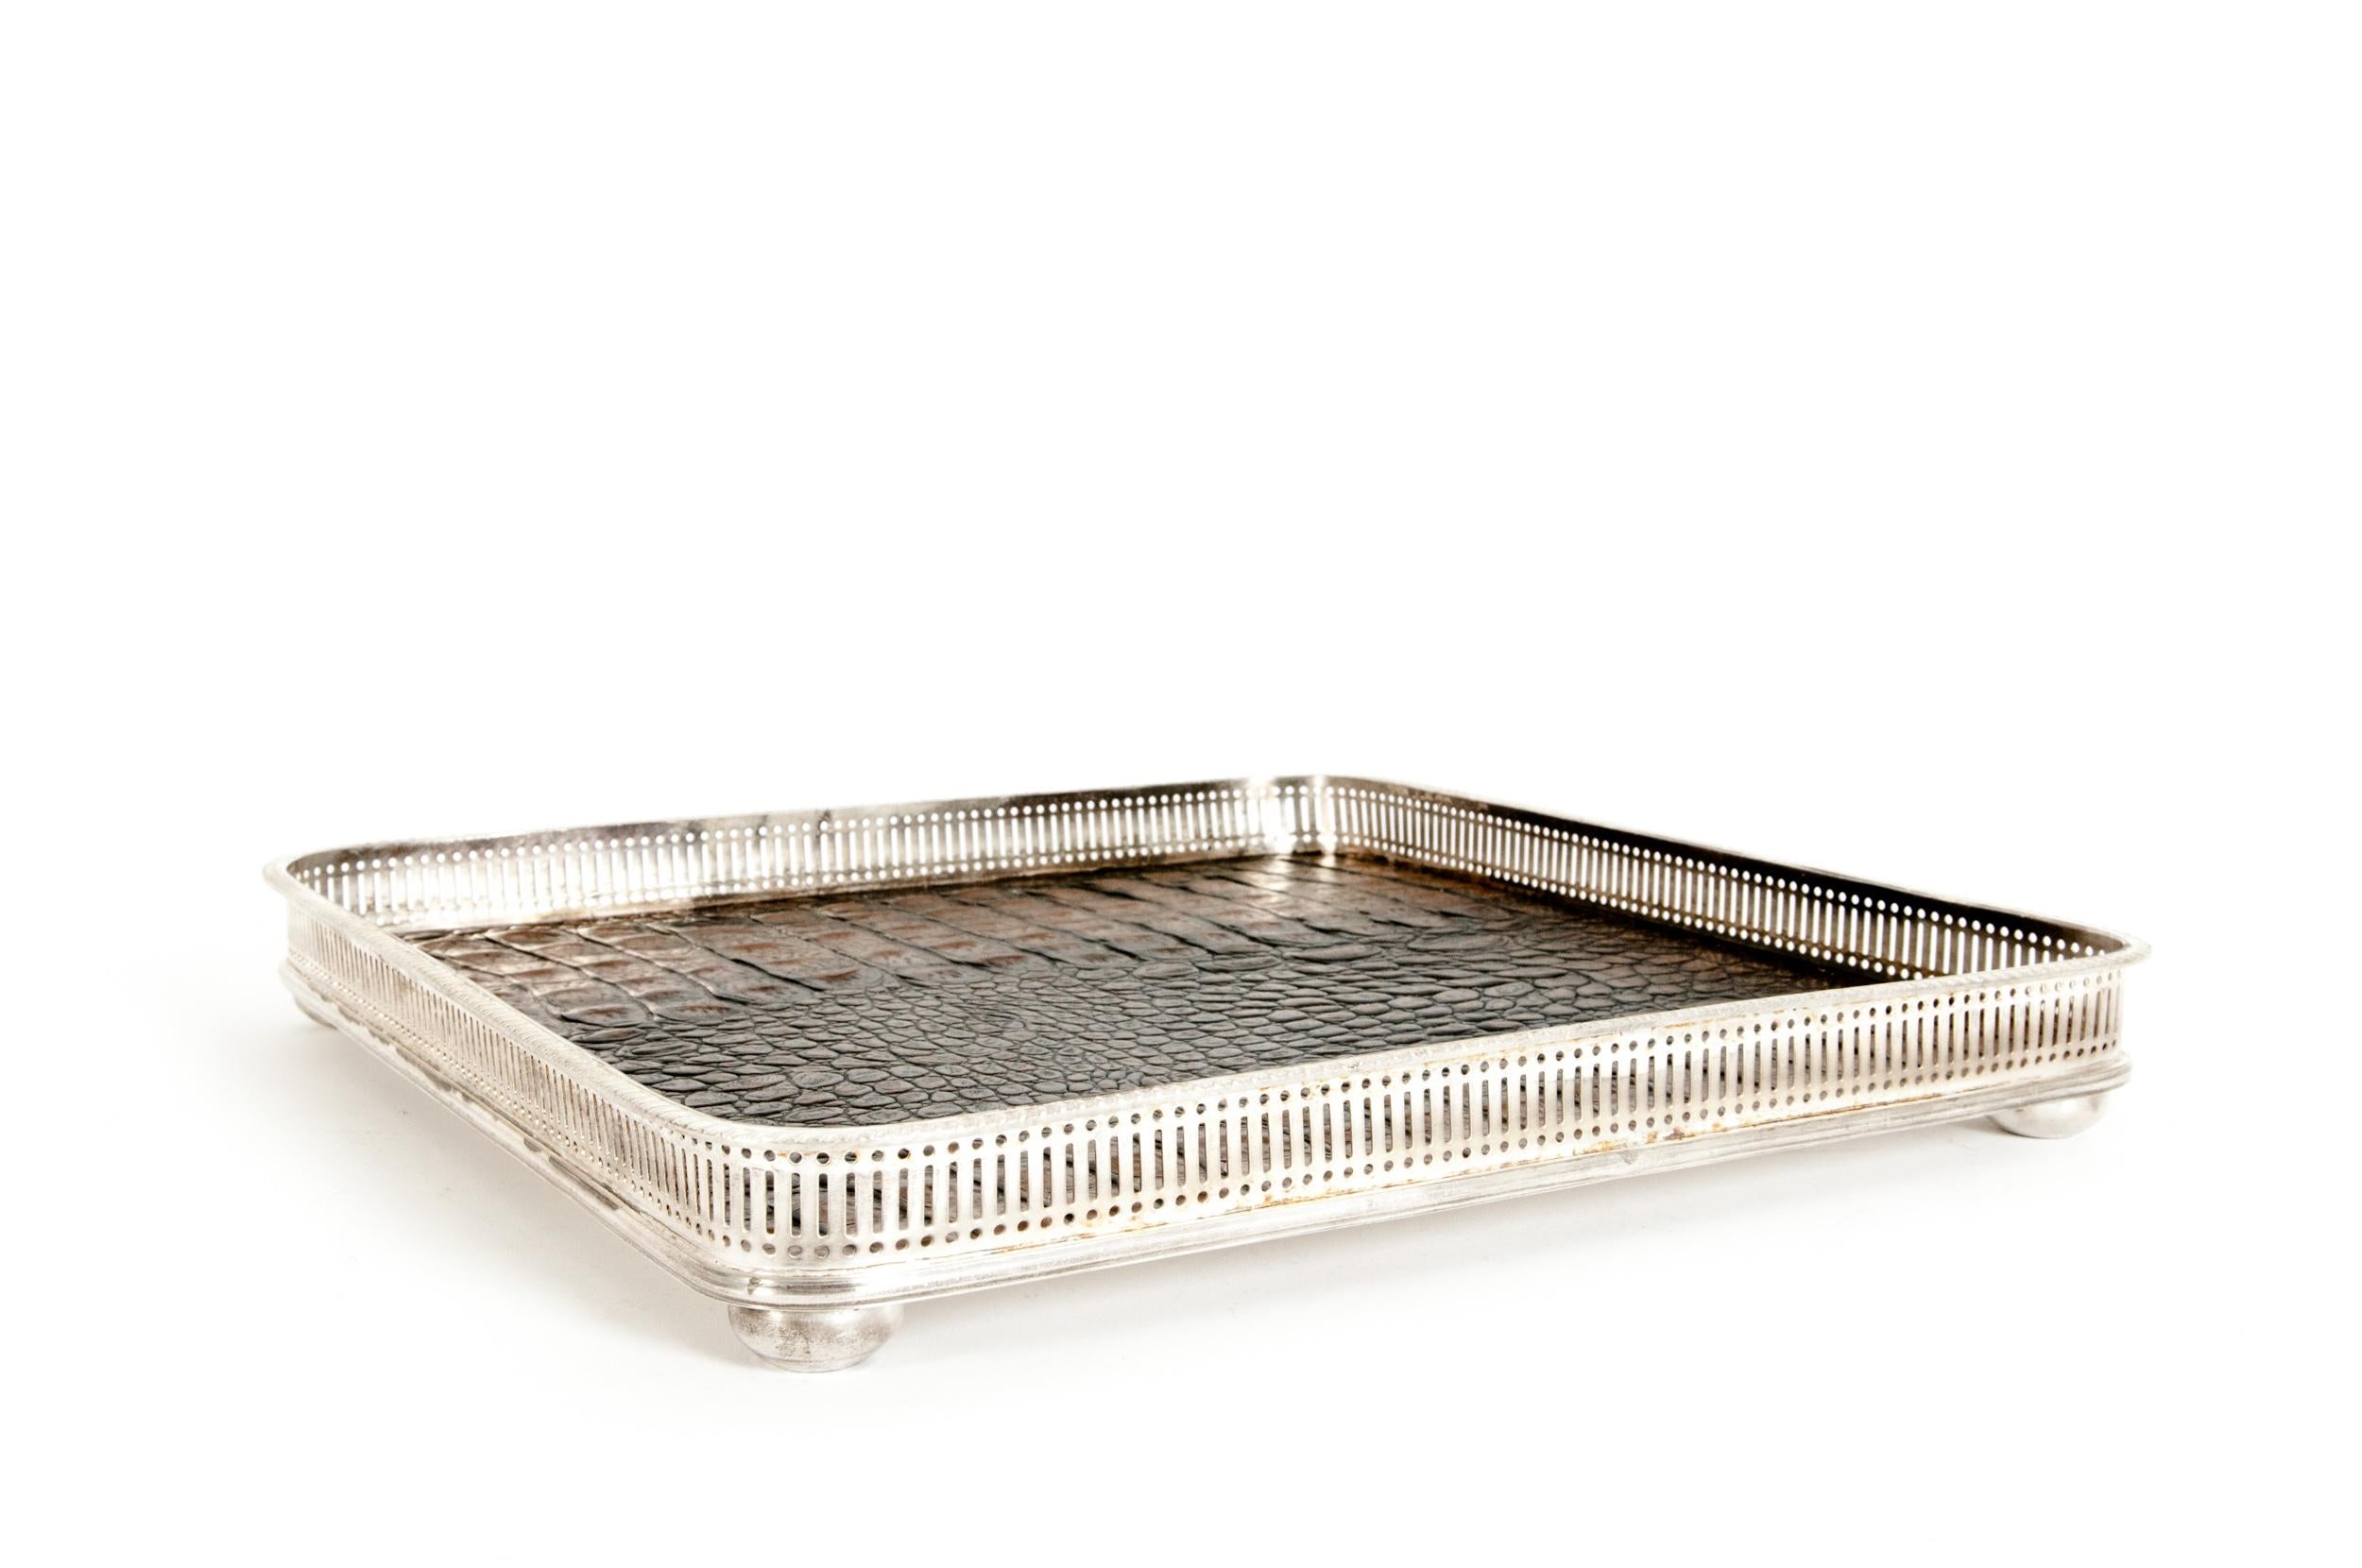 English sheffield silver plated crocodile interior barware / tableware serving footed gallery tray. The tray is in great condition with appropriate wear consistent with age / use. Maker's mark undersigned. The barware / serving tray is about 14